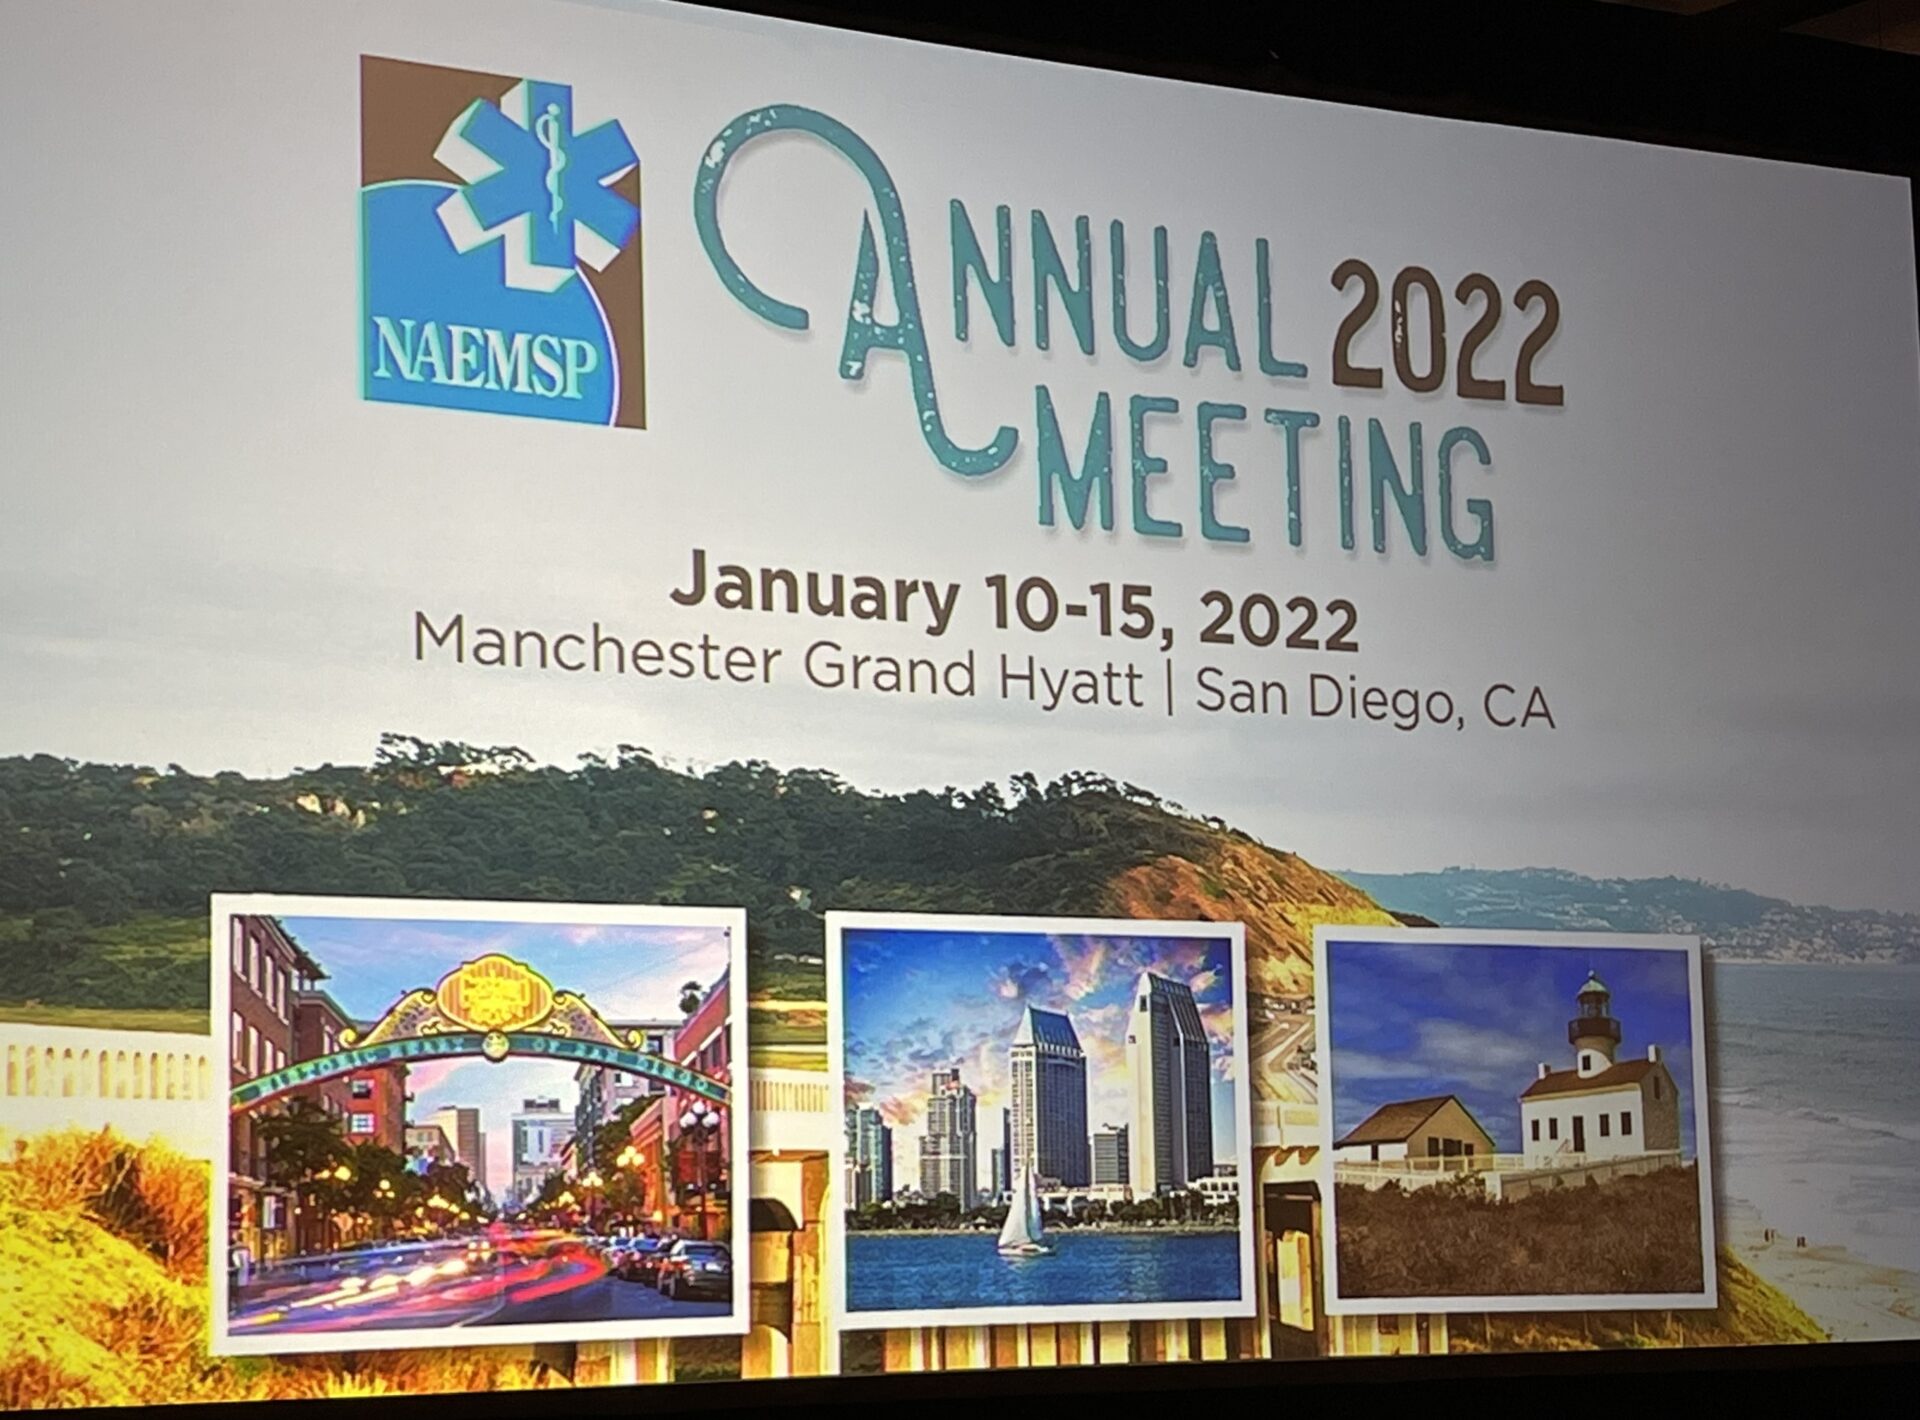 A sign that says annual meeting 2 0 2 2